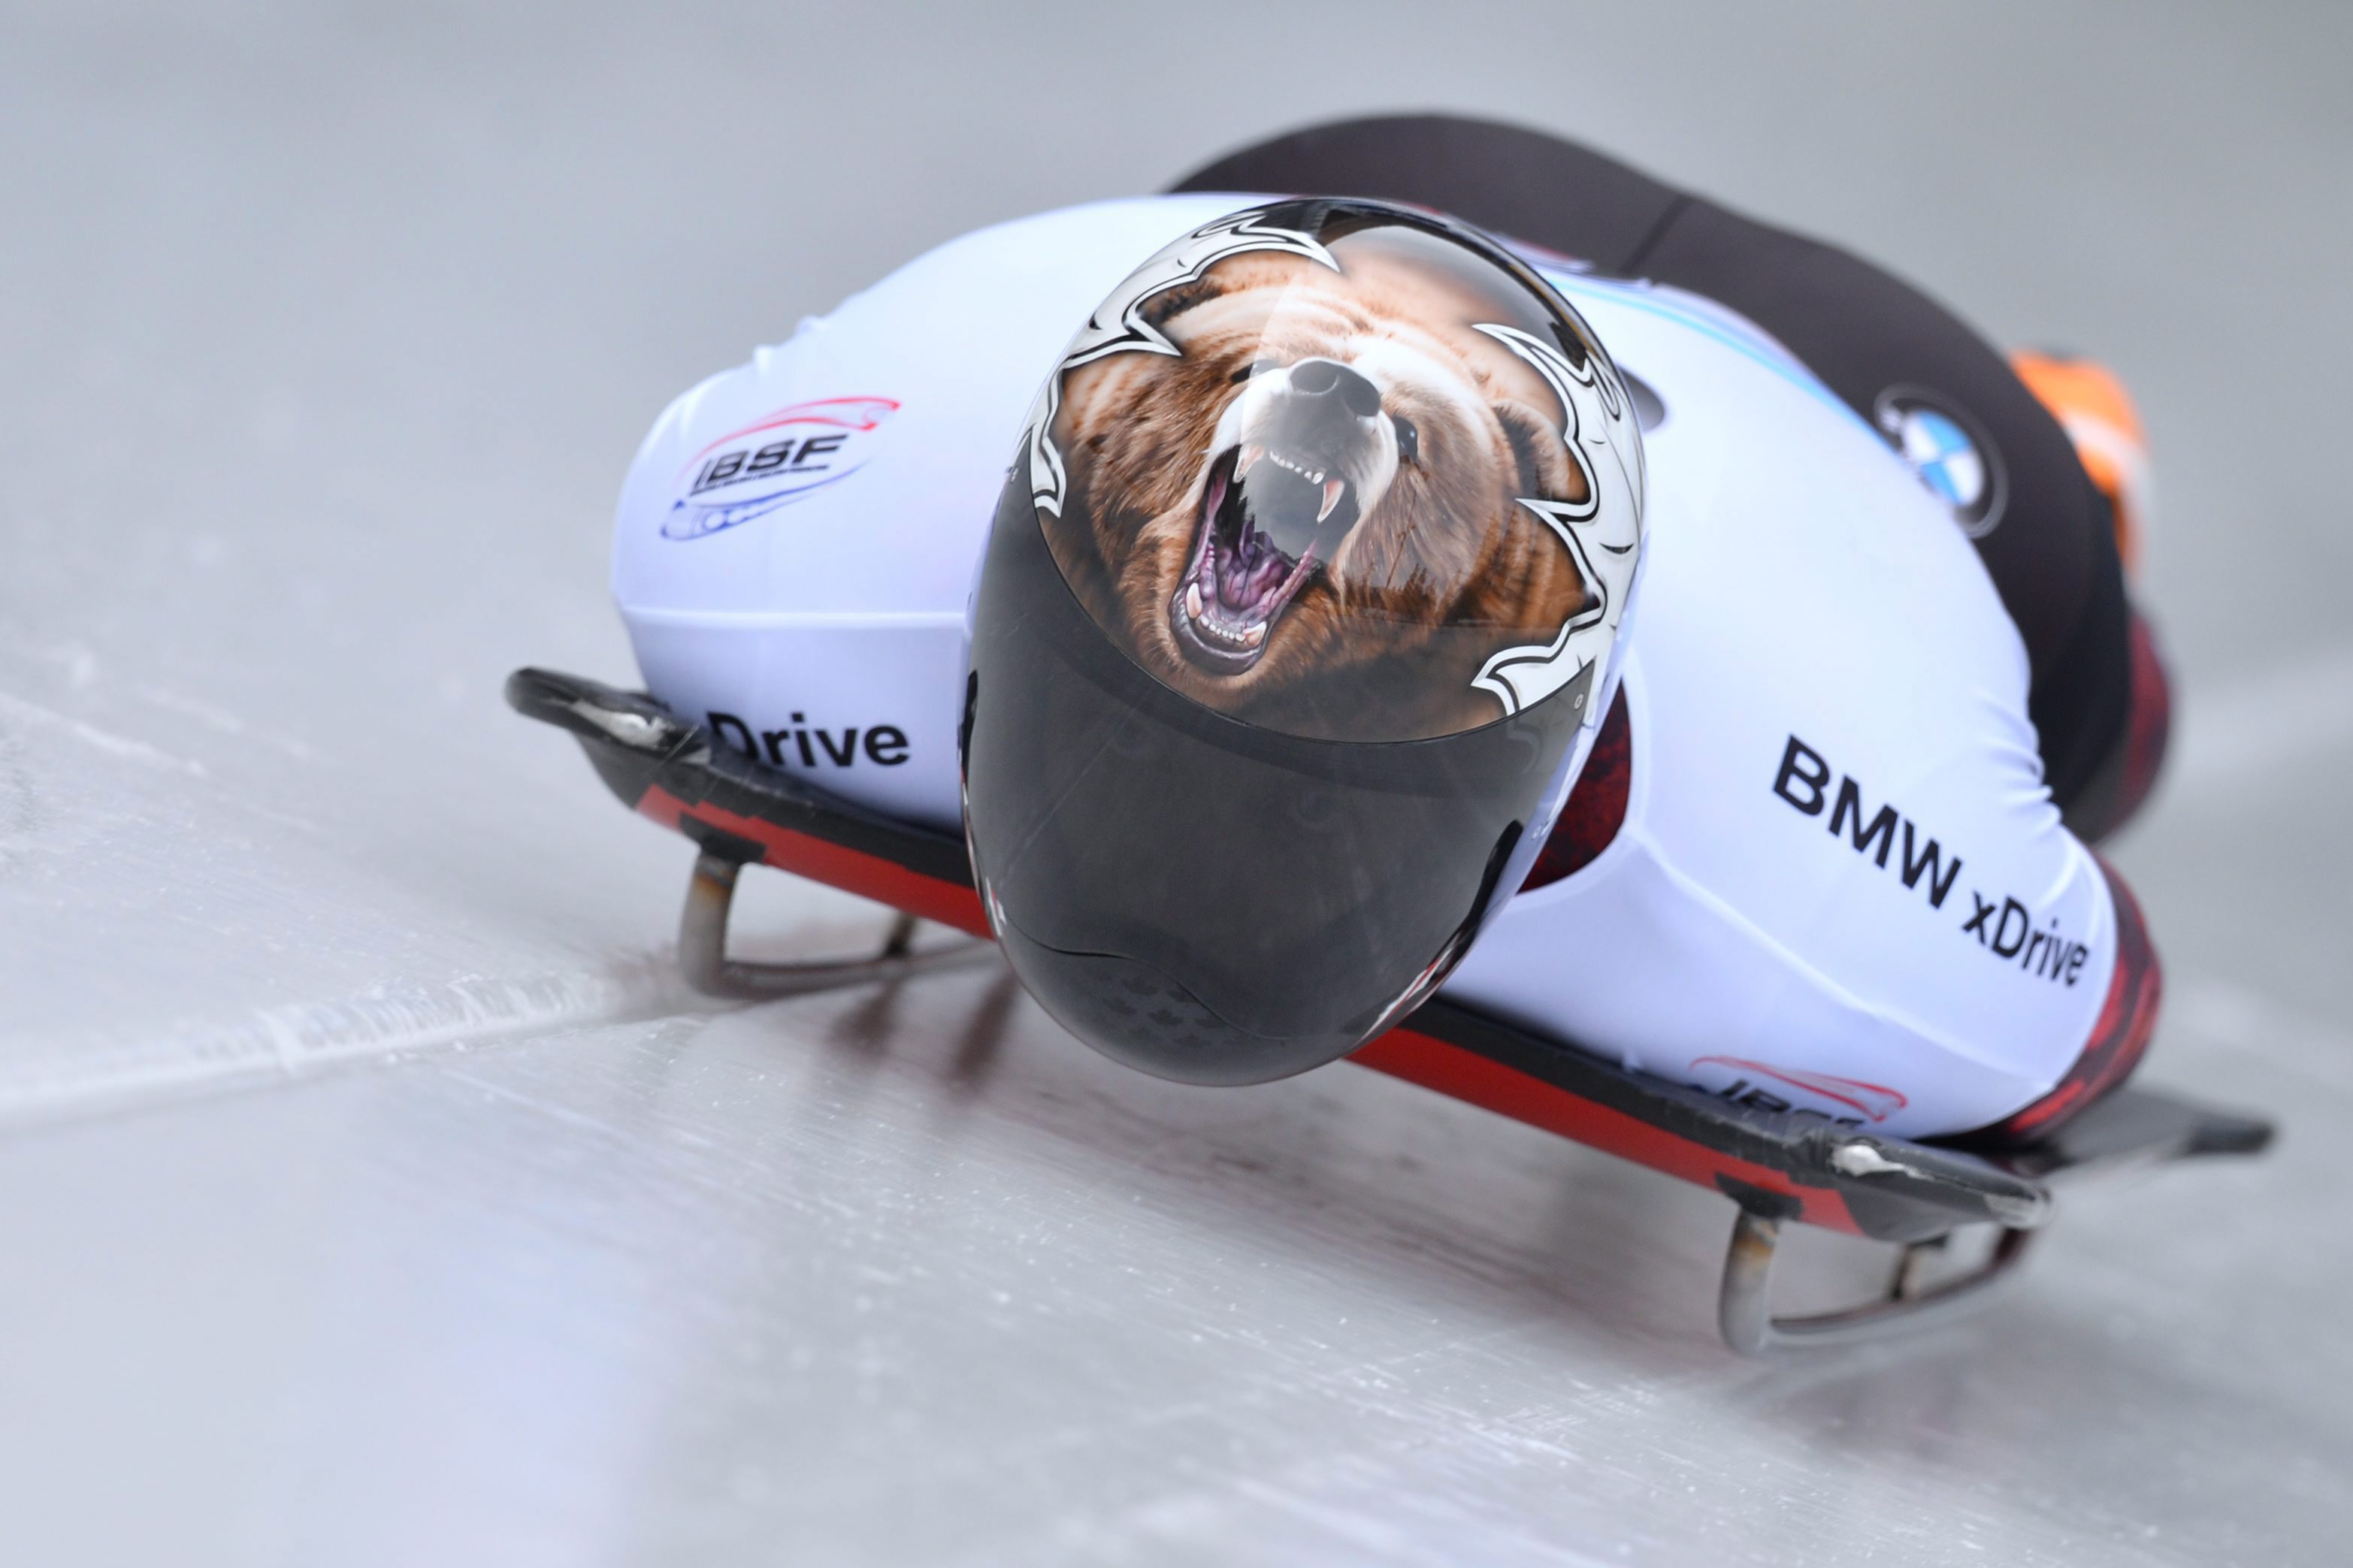 Dave Greszczyszyn of Canada speeds down the track during his first run of the men's Skeleton World Cup race in Koenigssee, southern Germany, Saturday, Feb. 27, 2016. (AP Photo/Kerstin Joensson)